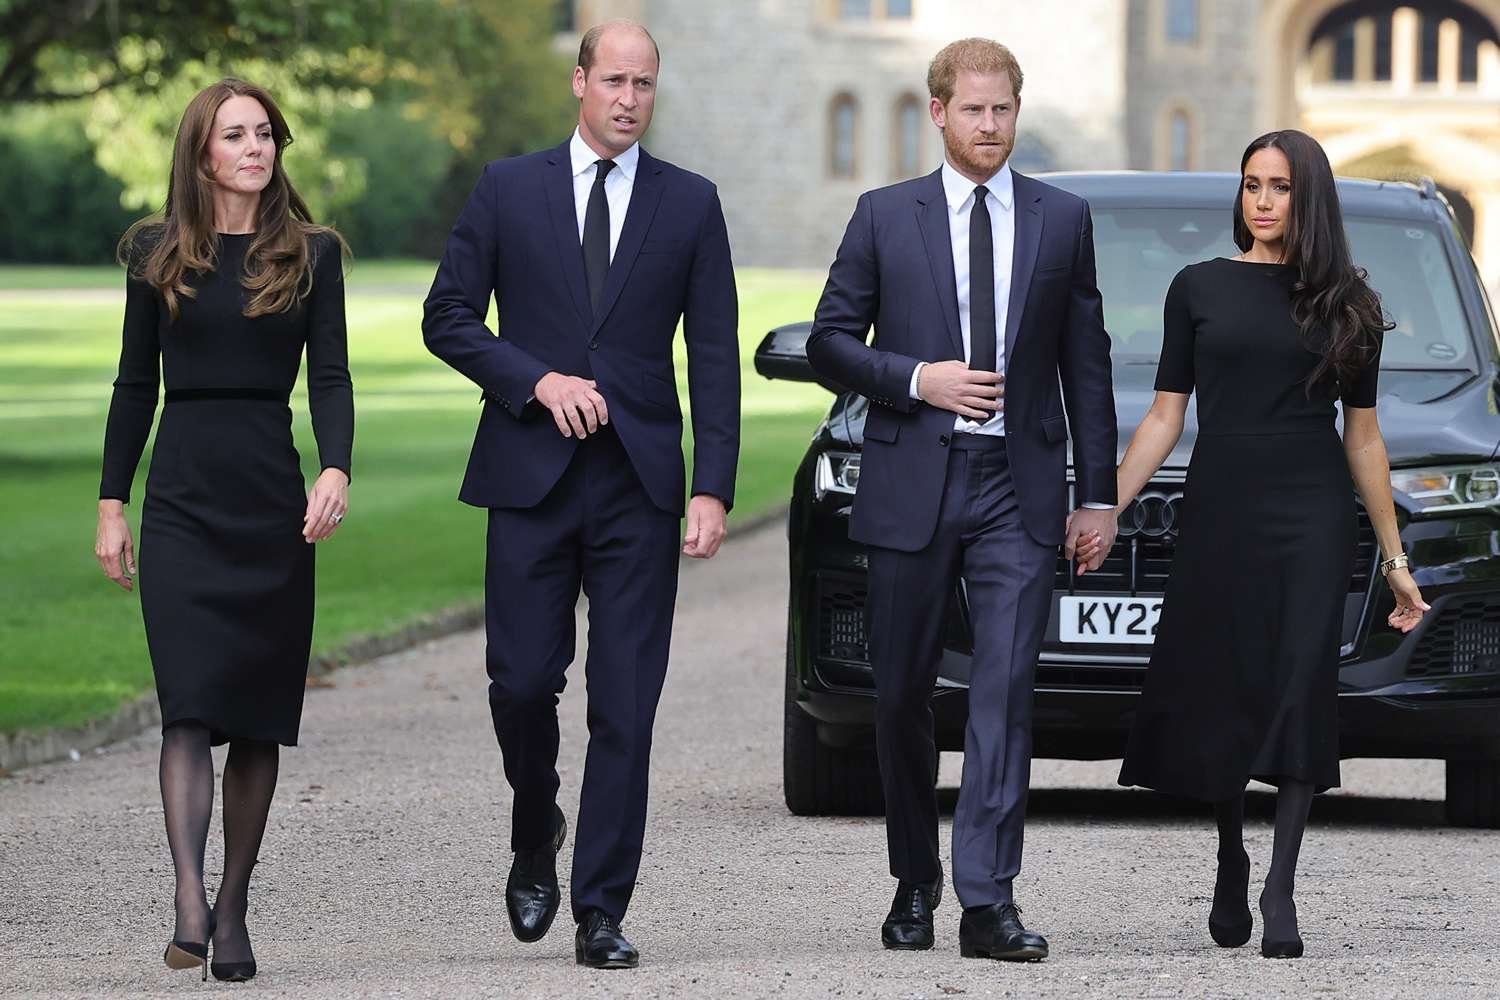 Will Kate Middleton and Prince William See Meghan Markle and Prince Harry During Their U.S. Visit?